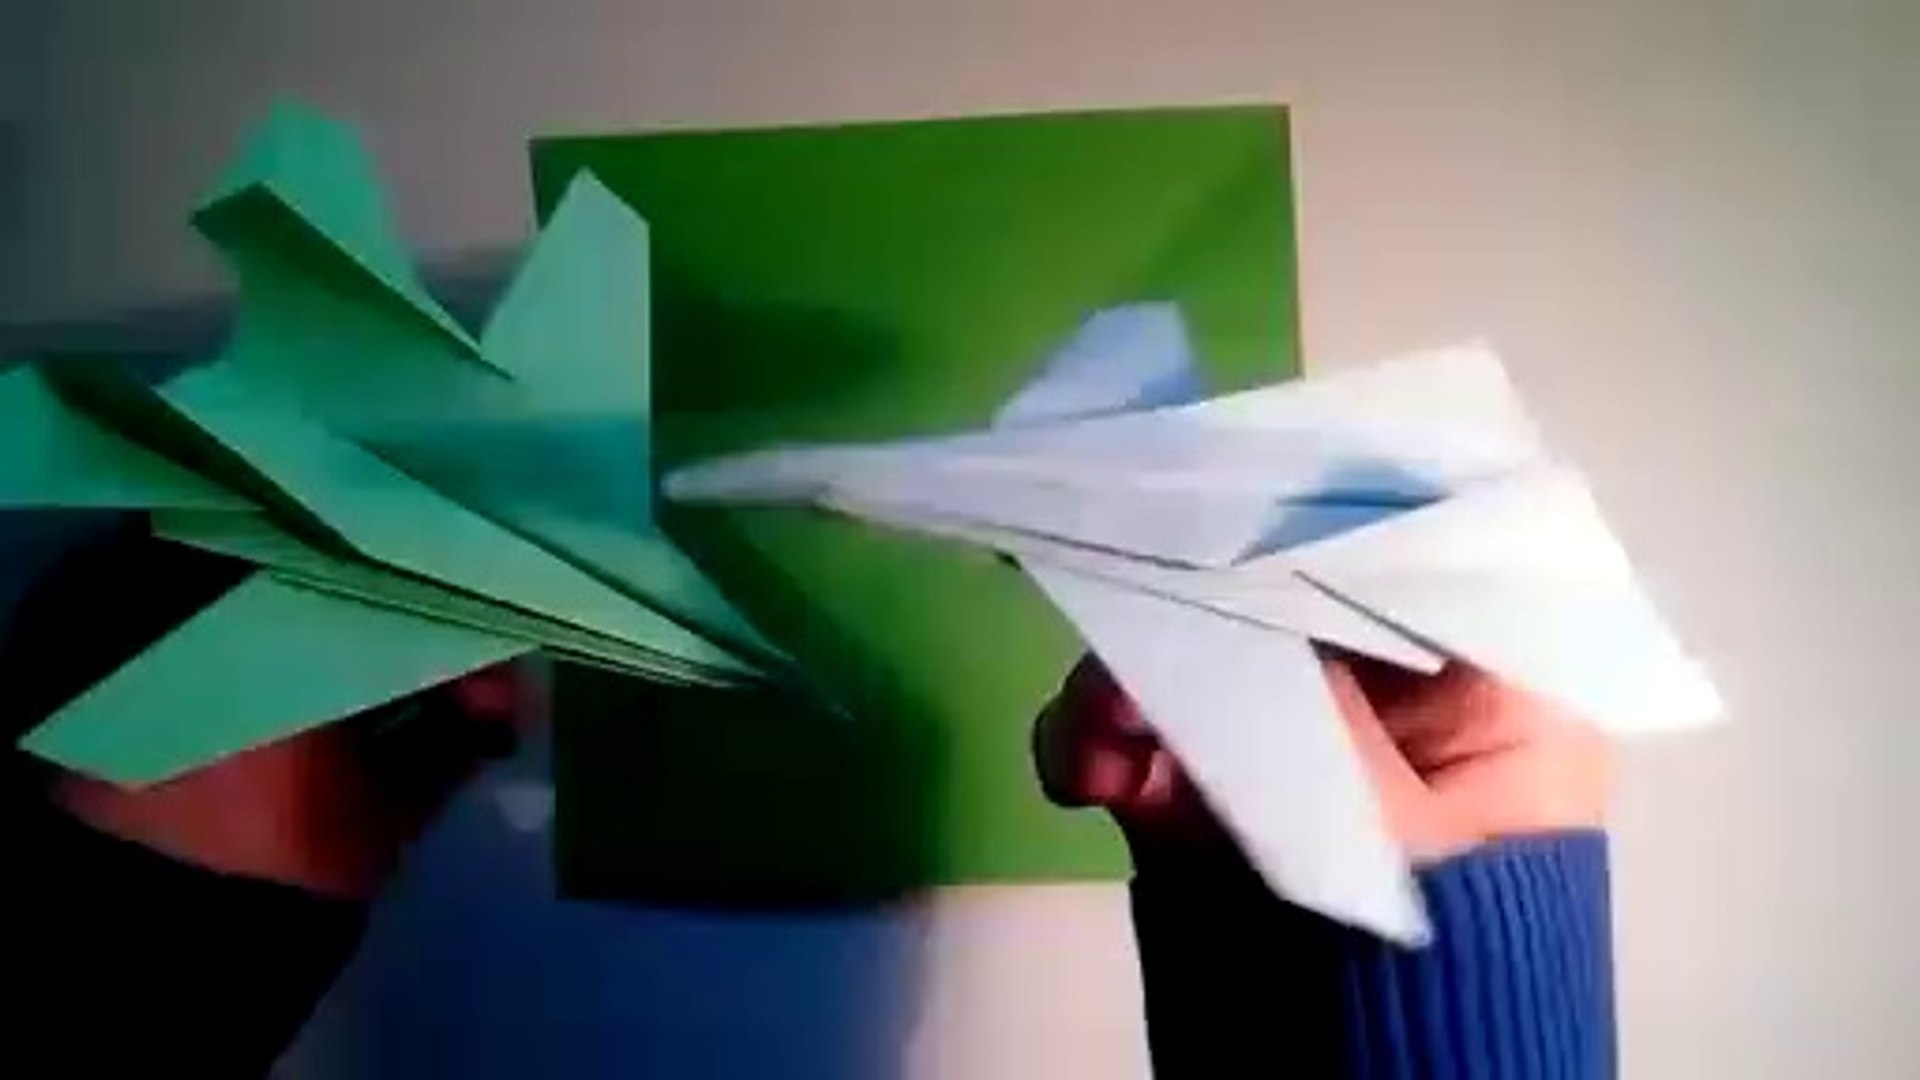 How To Make An Origami Plane How To Make An Origami F14 Tomcat Fighter Jet Paper Airplane Easy Paper Plane Origami Jet Fighter Dermh